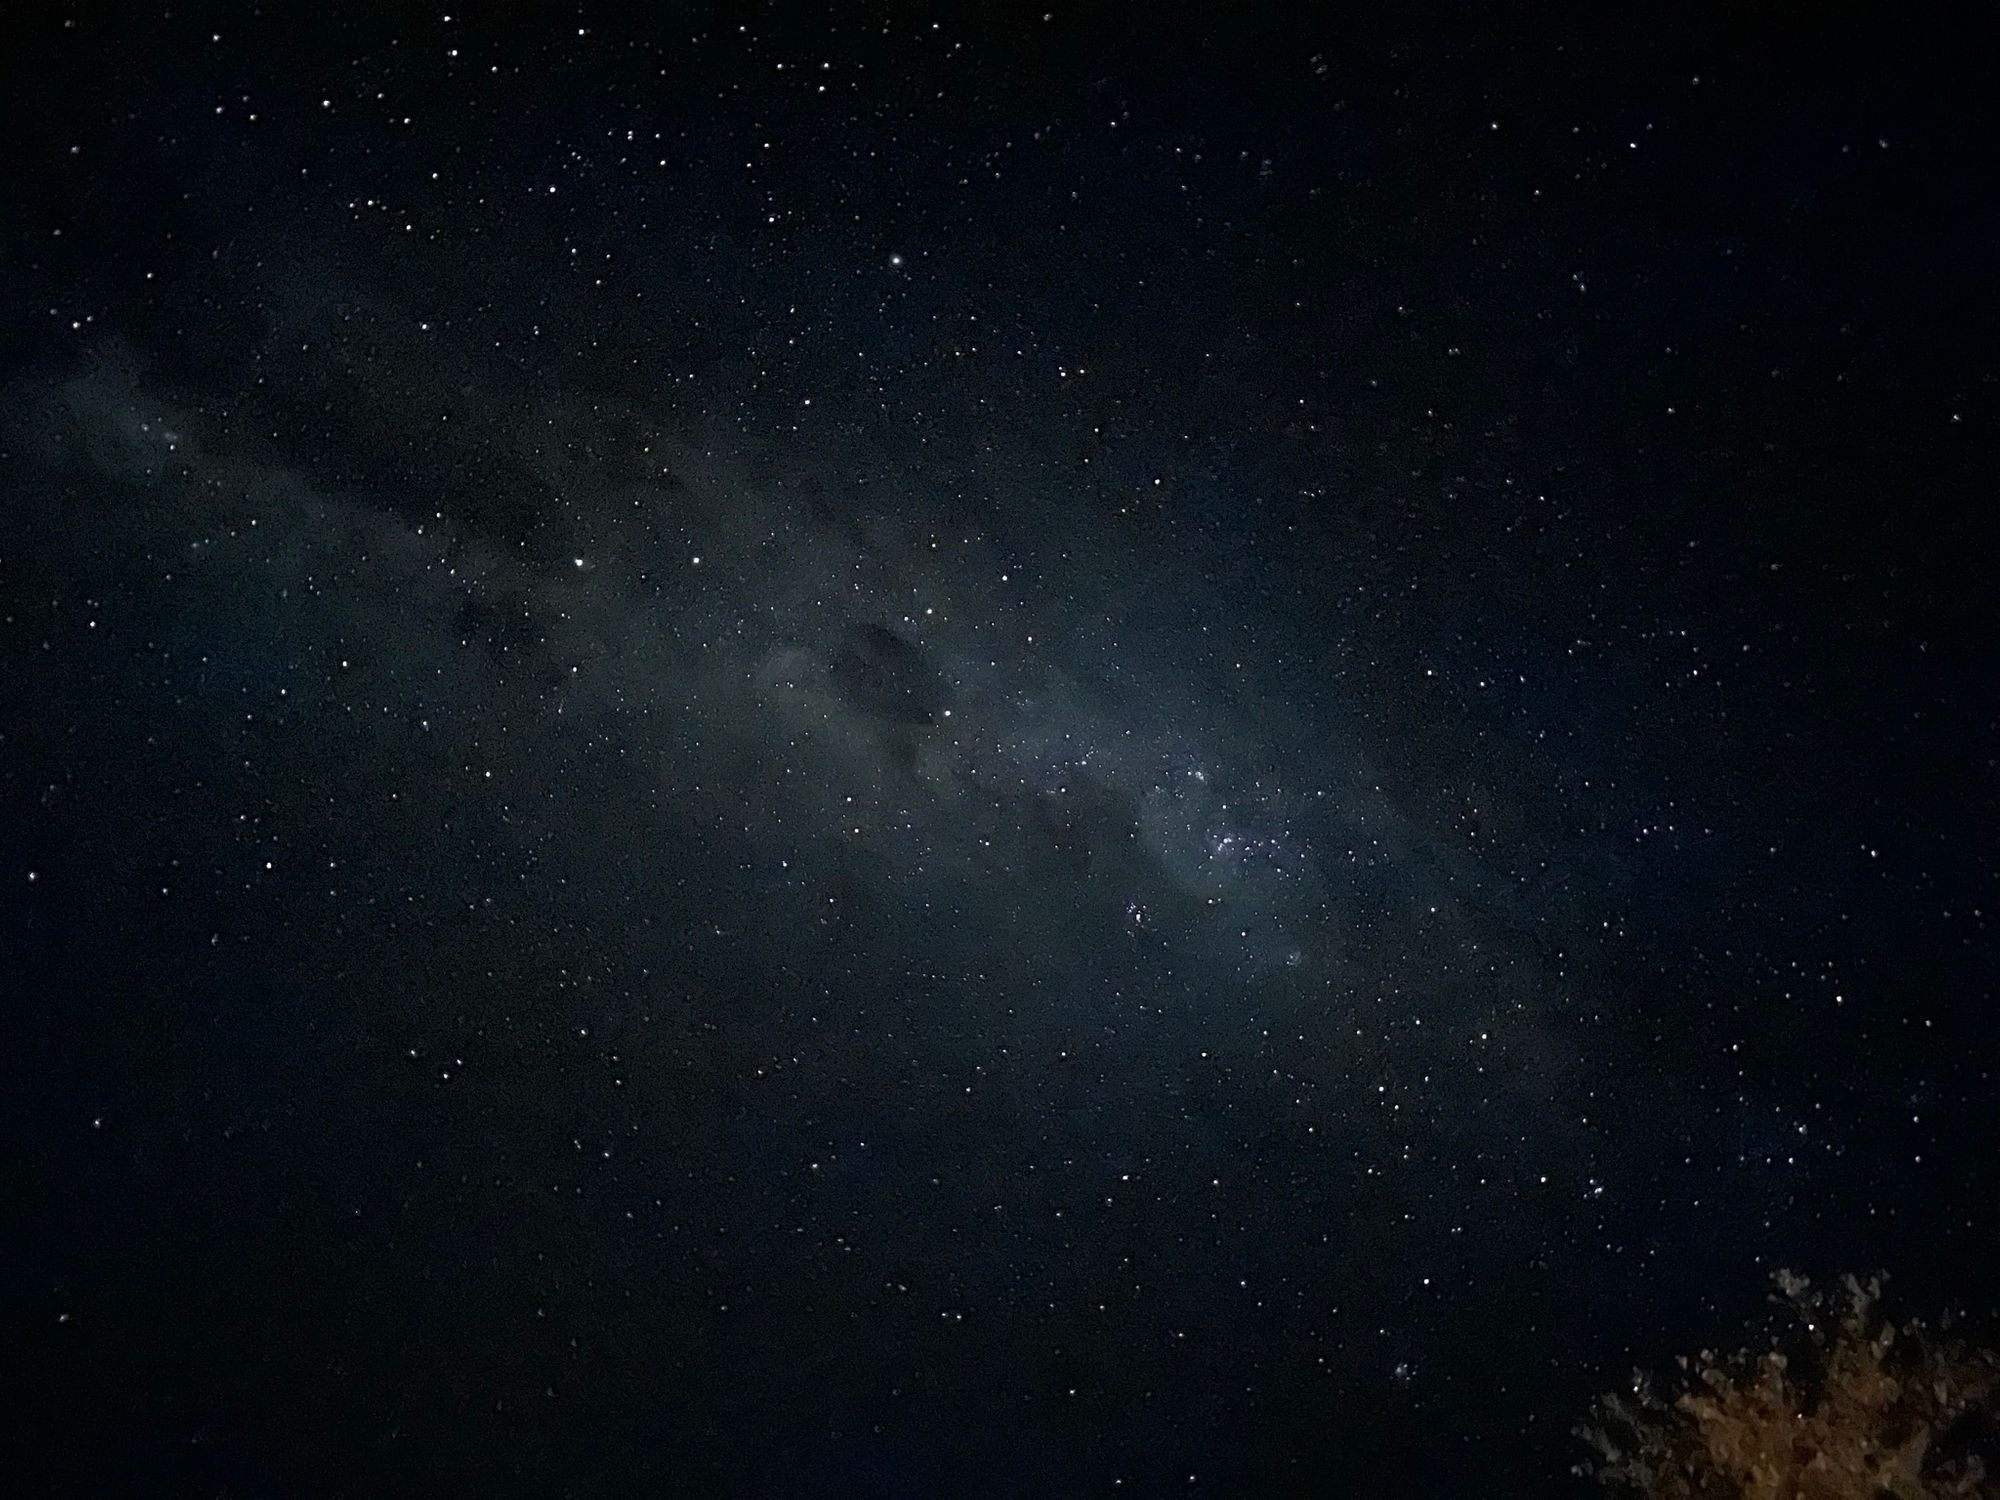 The night sky studded with stars, Milky Way at the centre.